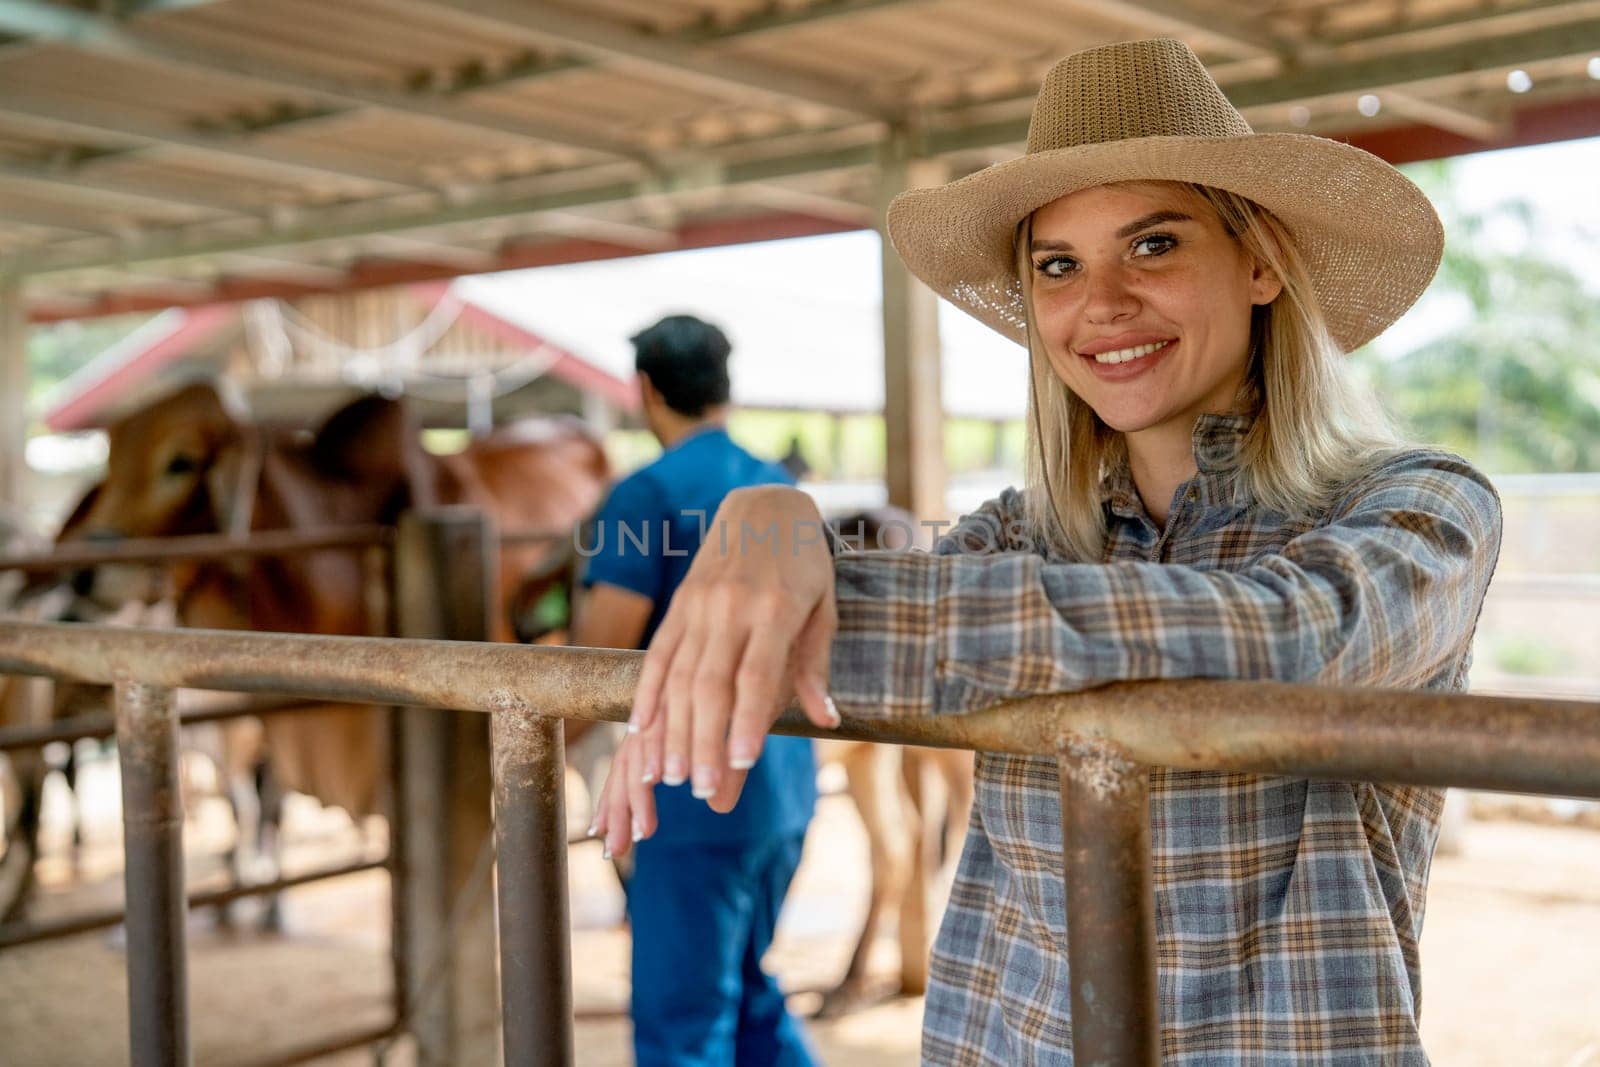 Beautiful caucasian farmer with hat relax near stable railing also look at camera with smiling and the veterinarian also check health of cows in background. by nrradmin